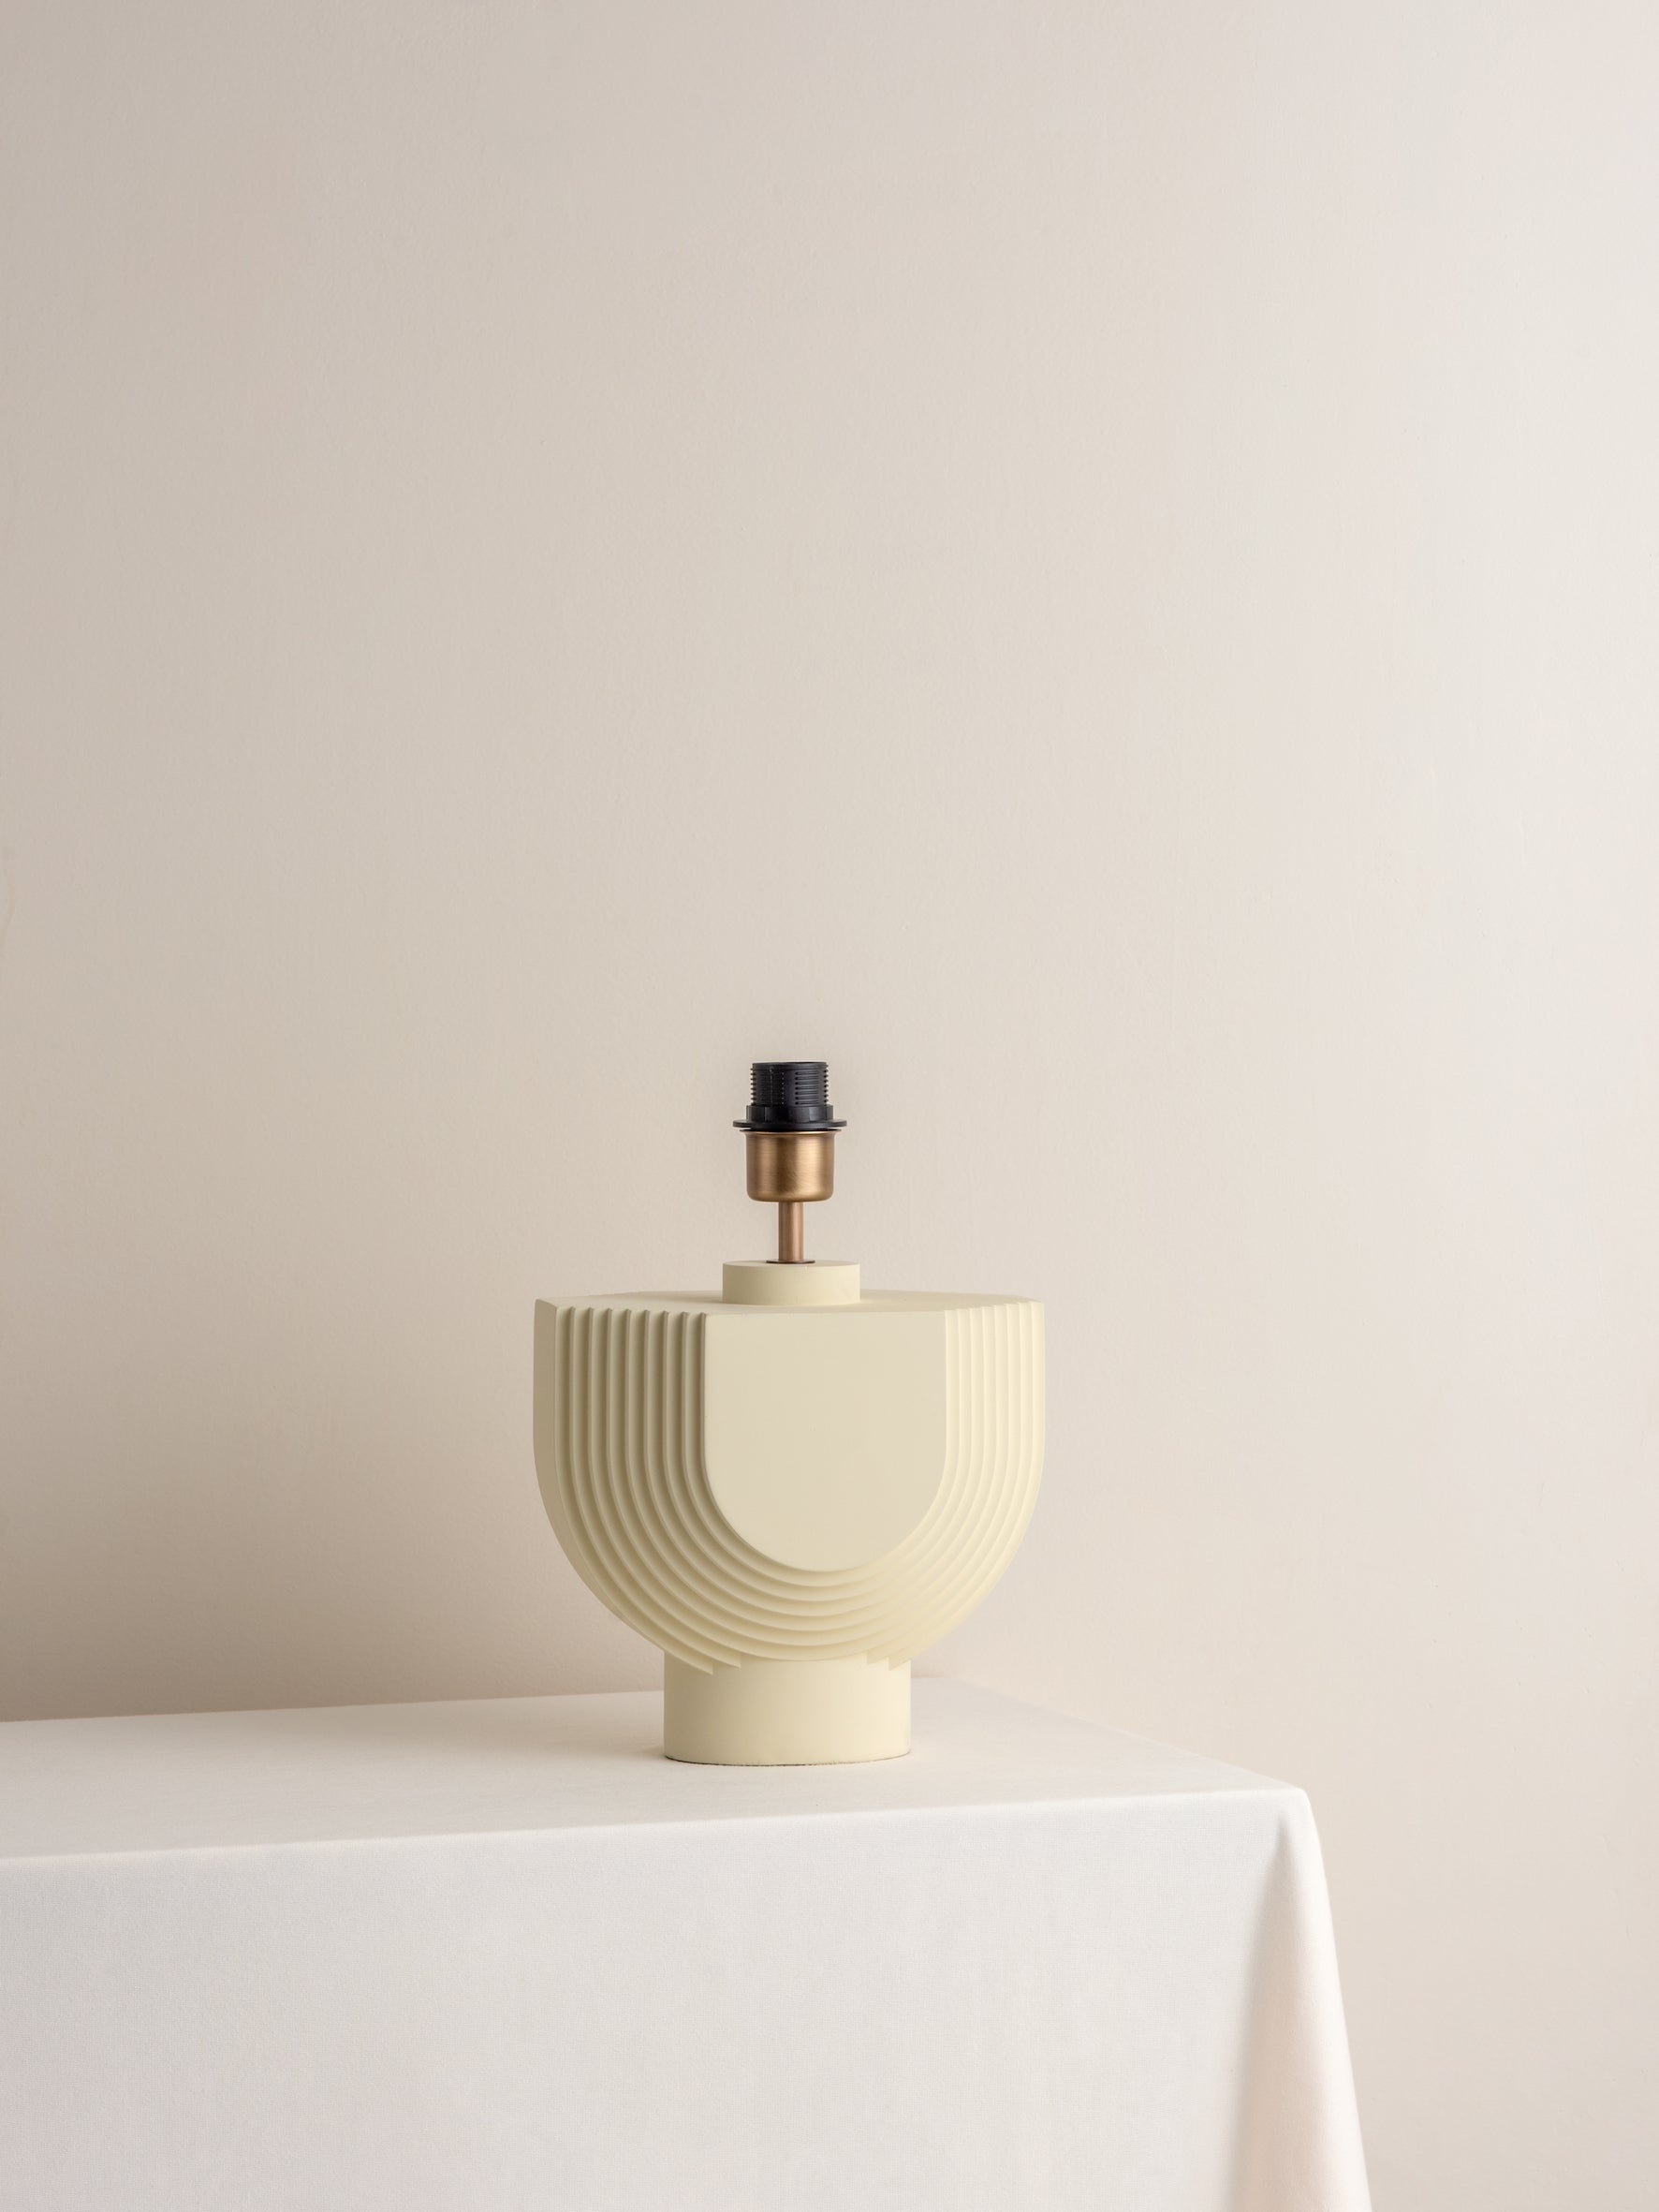 Editions concrete lamp with + aged brass shade | Table Lamp | Lights & Lamps | UK | Modern Affordable Designer Lighting